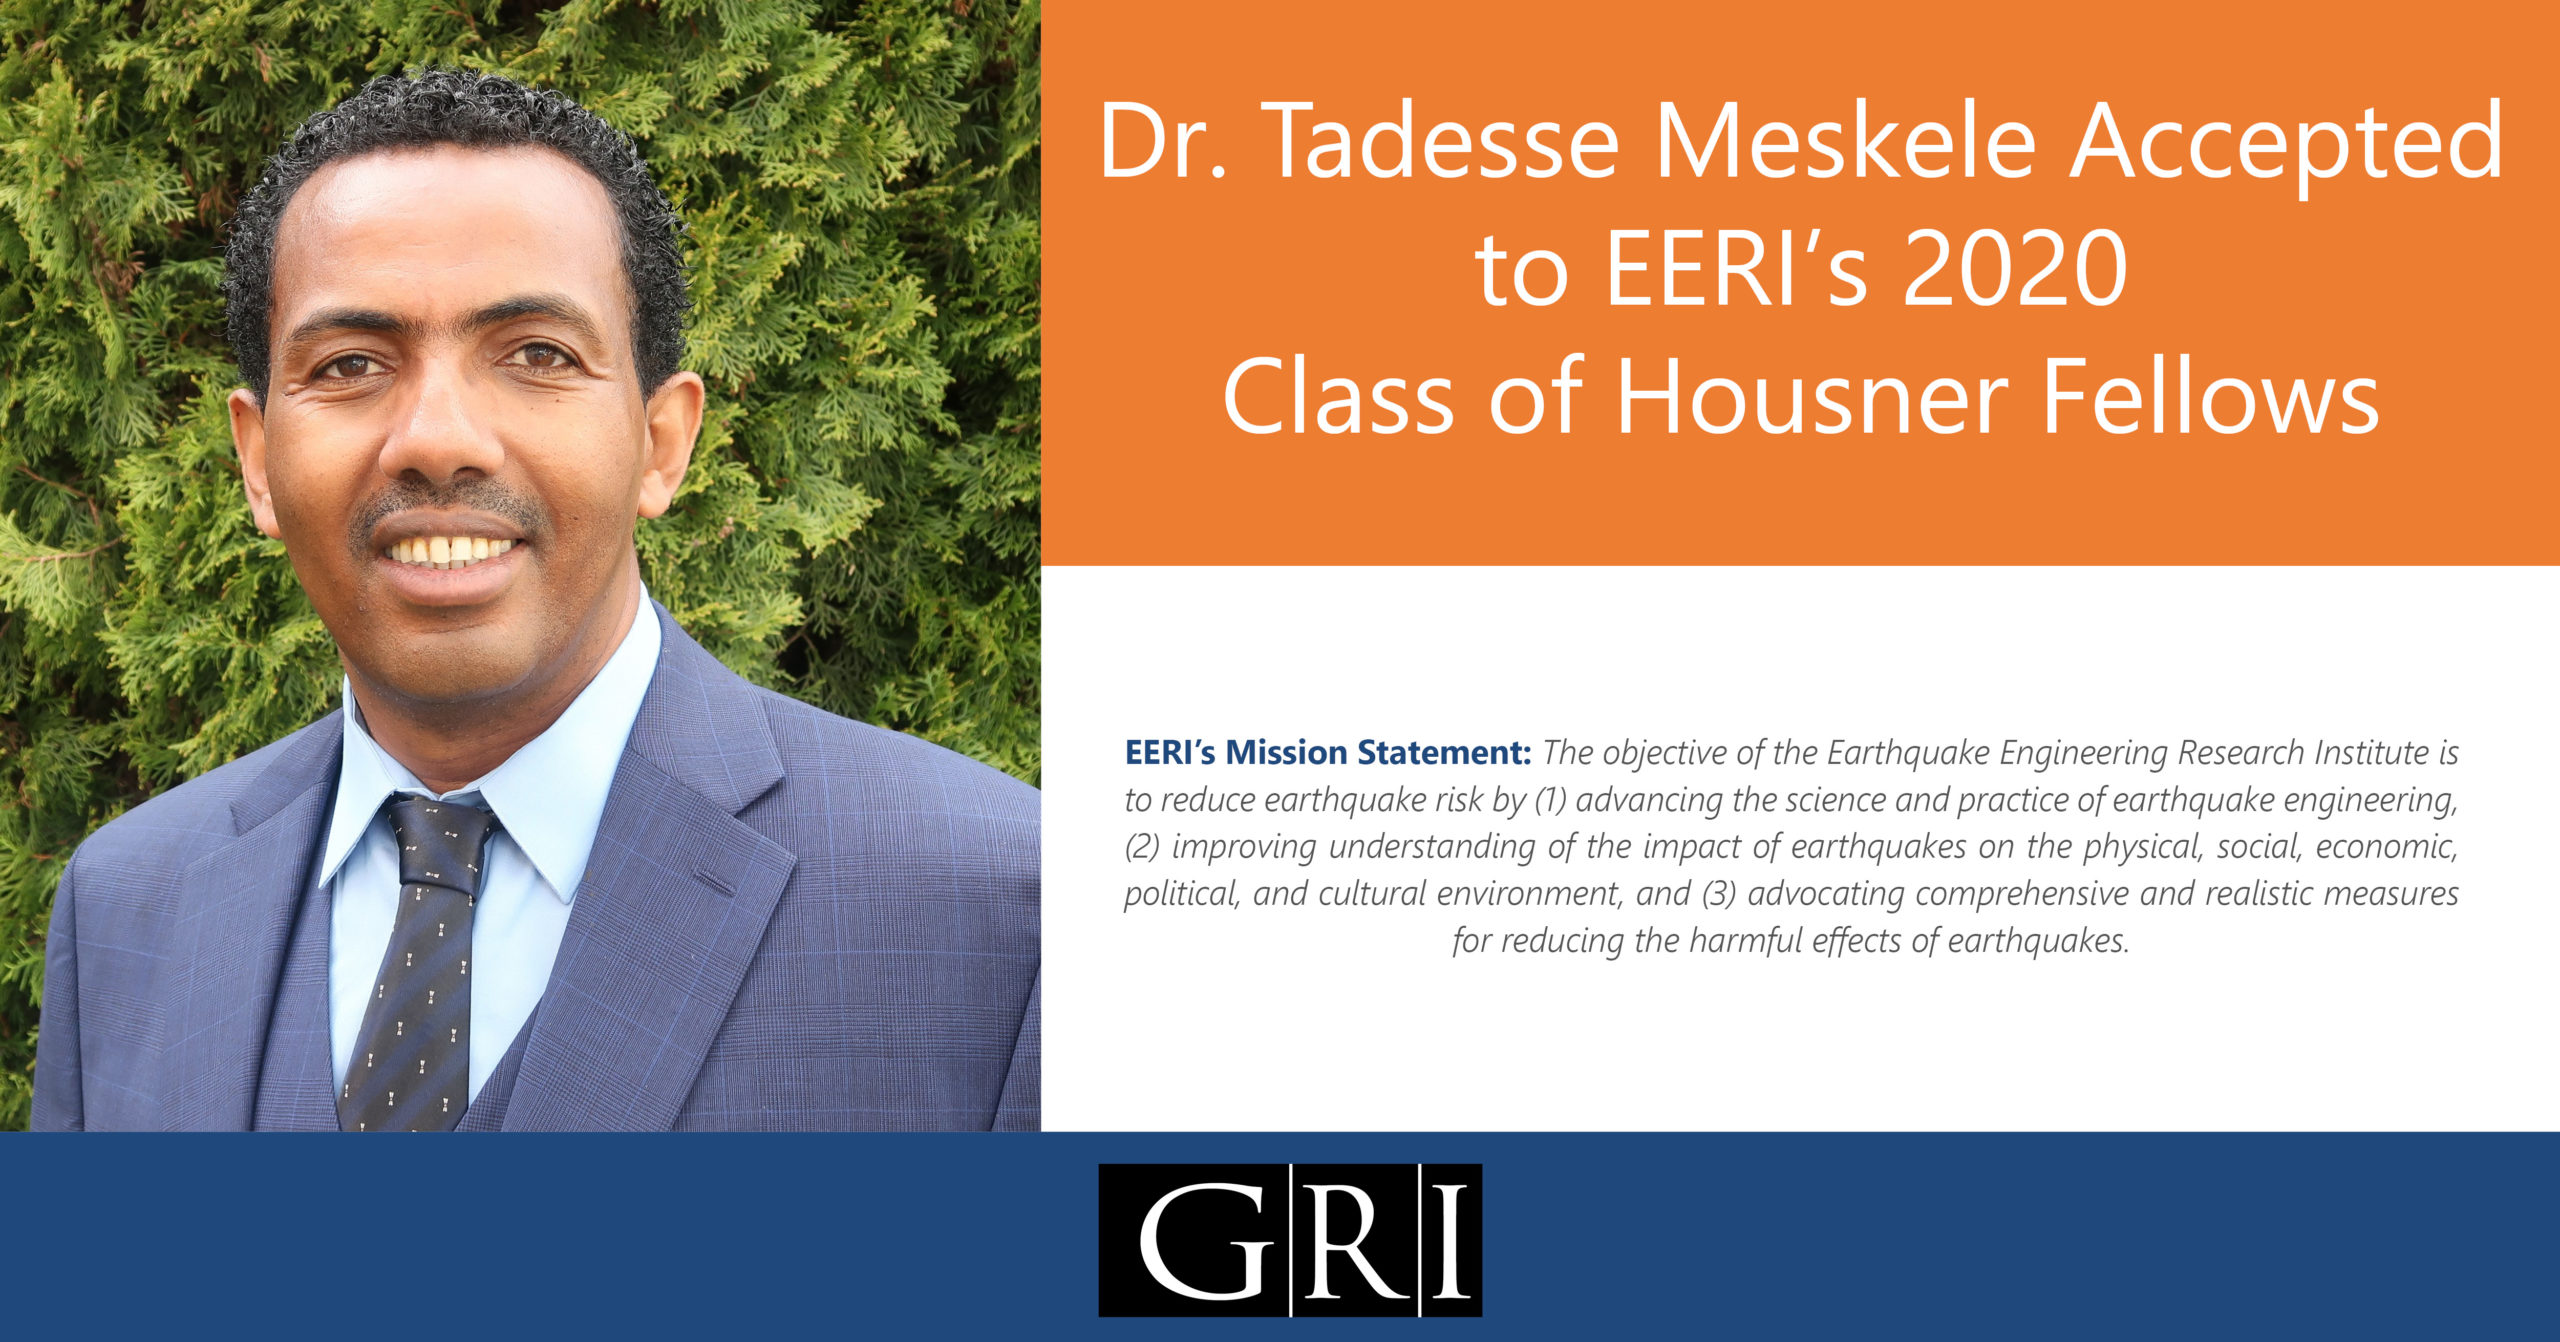 Dr. Tadesse Meskele Accepted to the EERI’s 2020 Class of Housner Fellows!